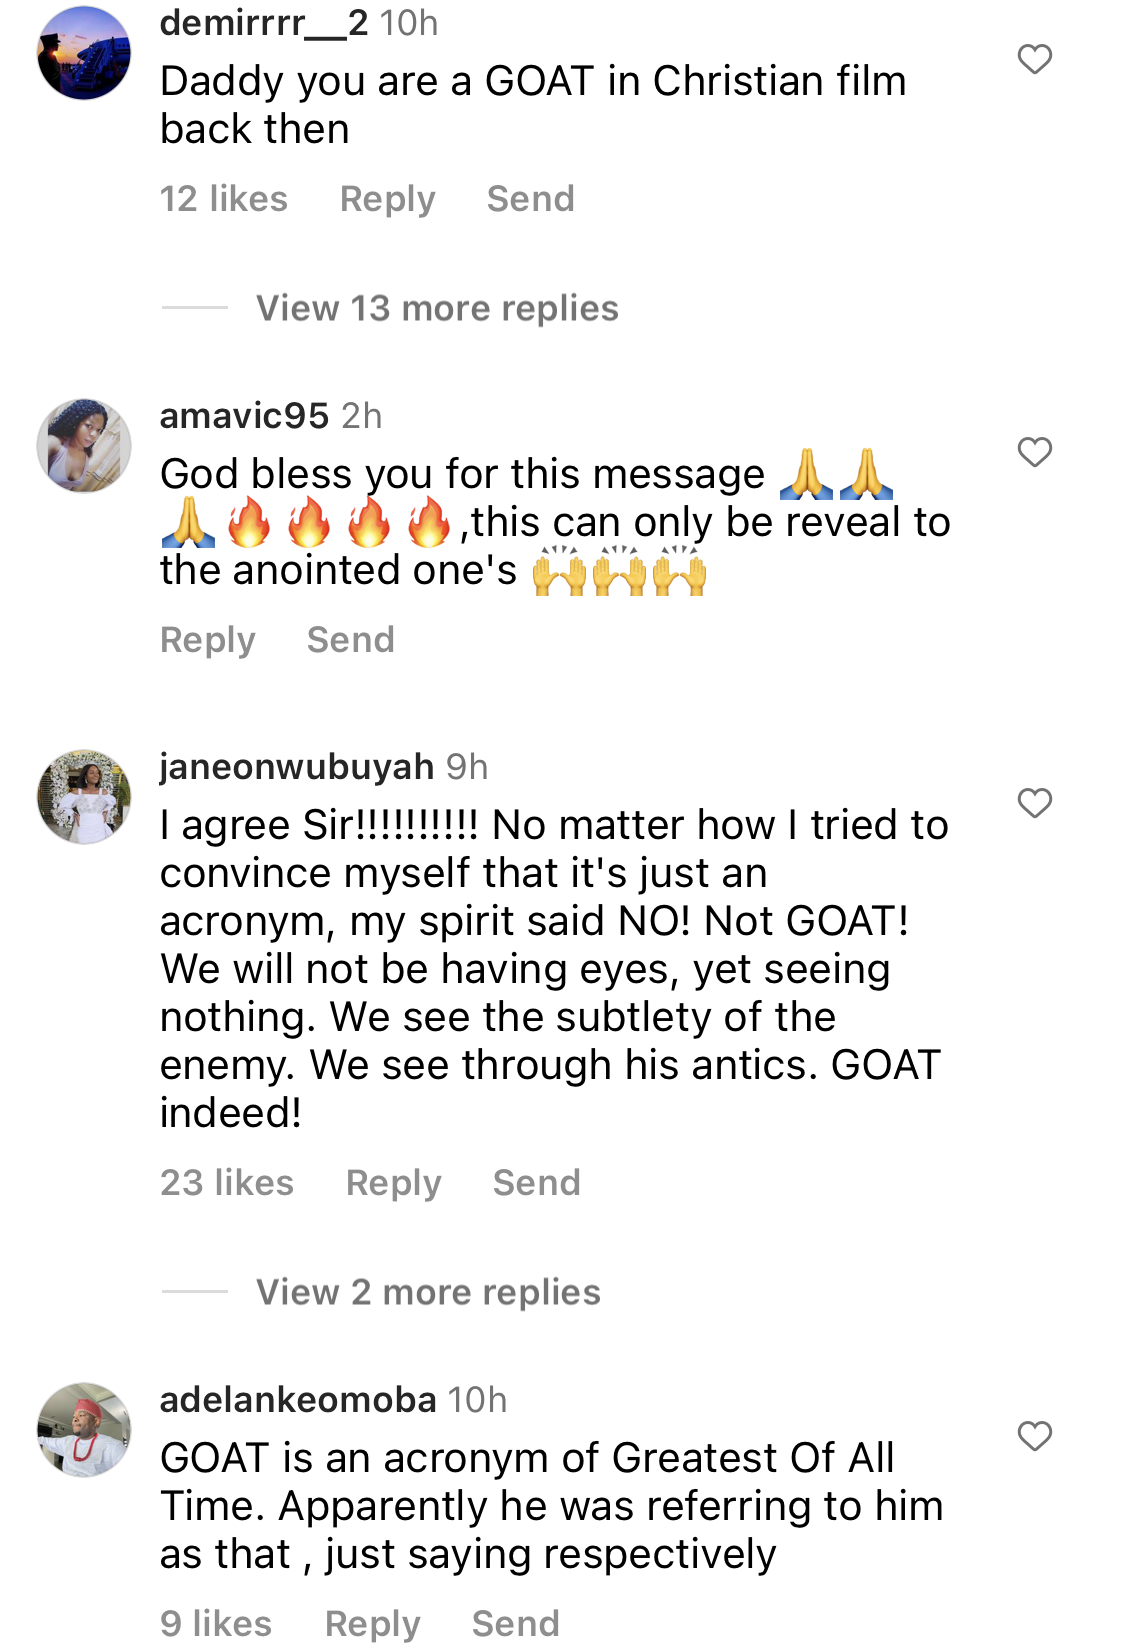 Goat in the Bible signifies stubborn unbelievers - Pastor Mike Bamiloye Blasts Tems for calling herself ‘GOAT’